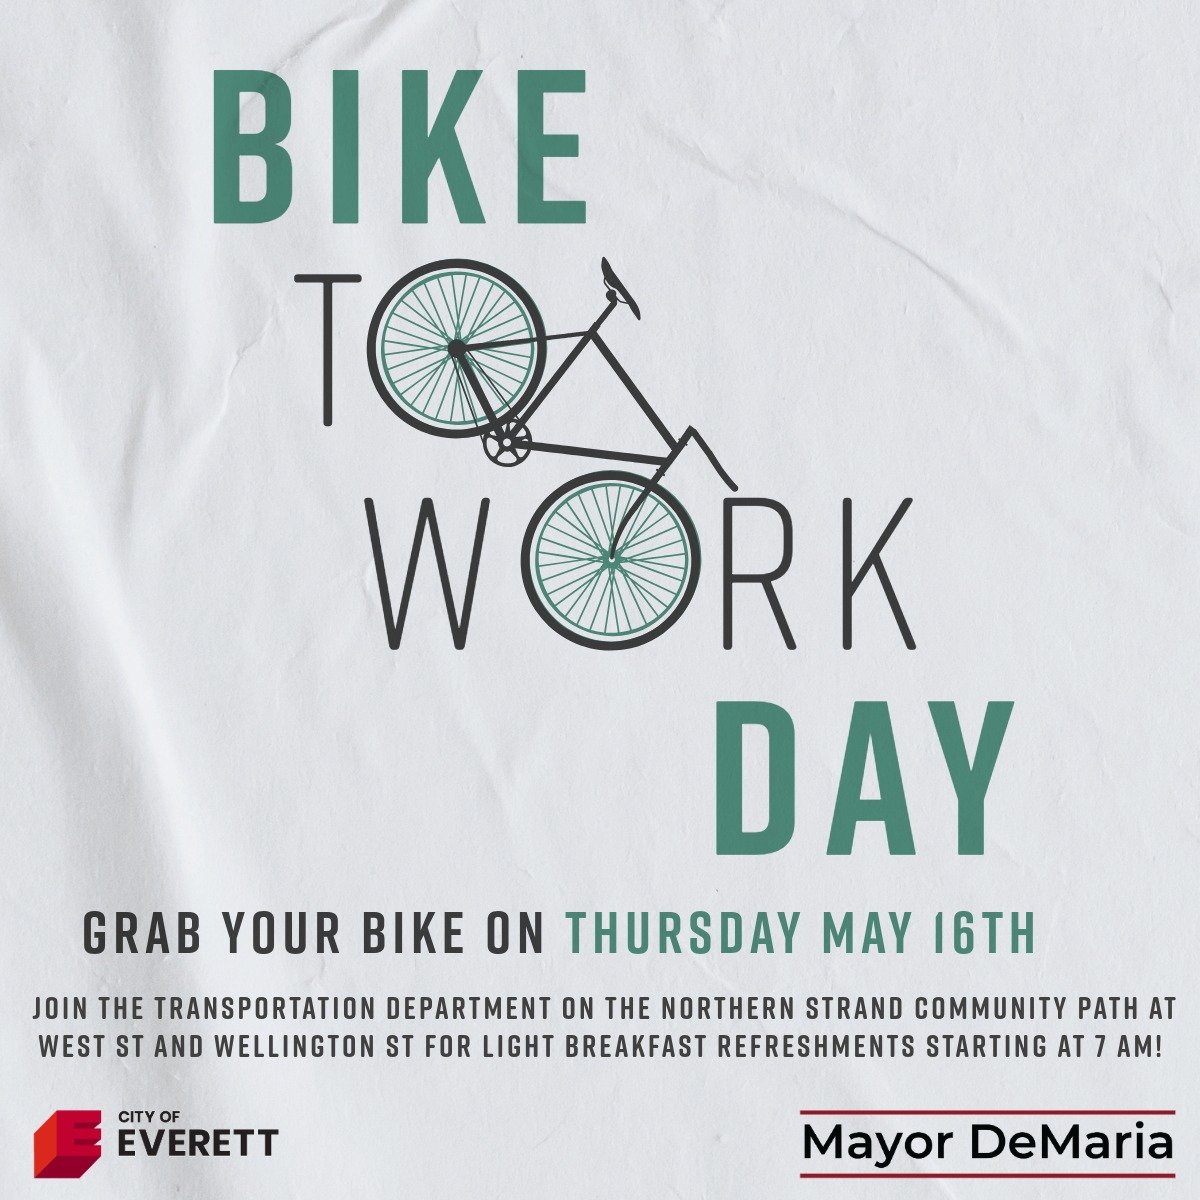 Bike Month isn't complete without at least one bike breakfast, right?!

📣Calling all Northern Strand bikers: join us for a free Bike Breakfast this THURSDAY to celebrate National Bike to Work Day! Enjoy on-the-go refreshments, enter a raffle, and sp